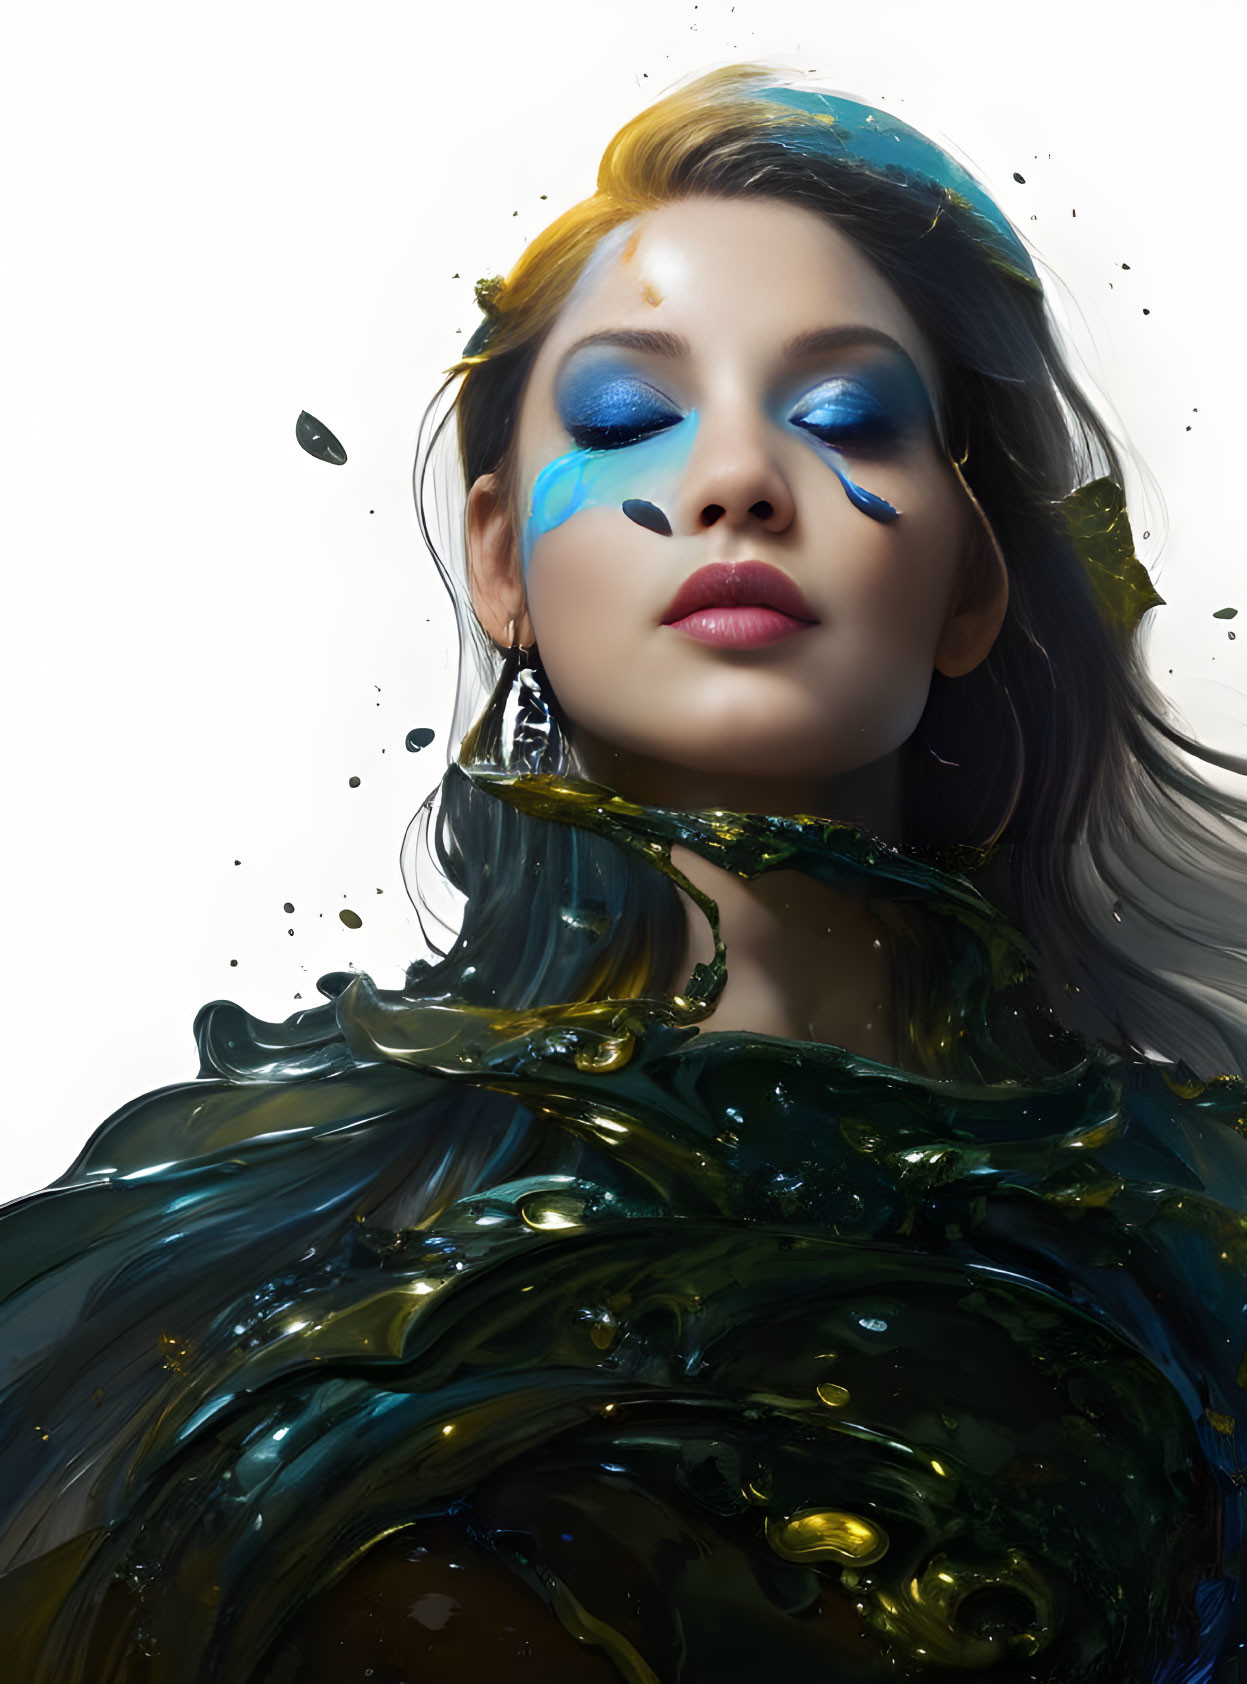 Woman with Vibrant Blue Eyeshadow in Swirls of Black, Blue, and Gold Paint